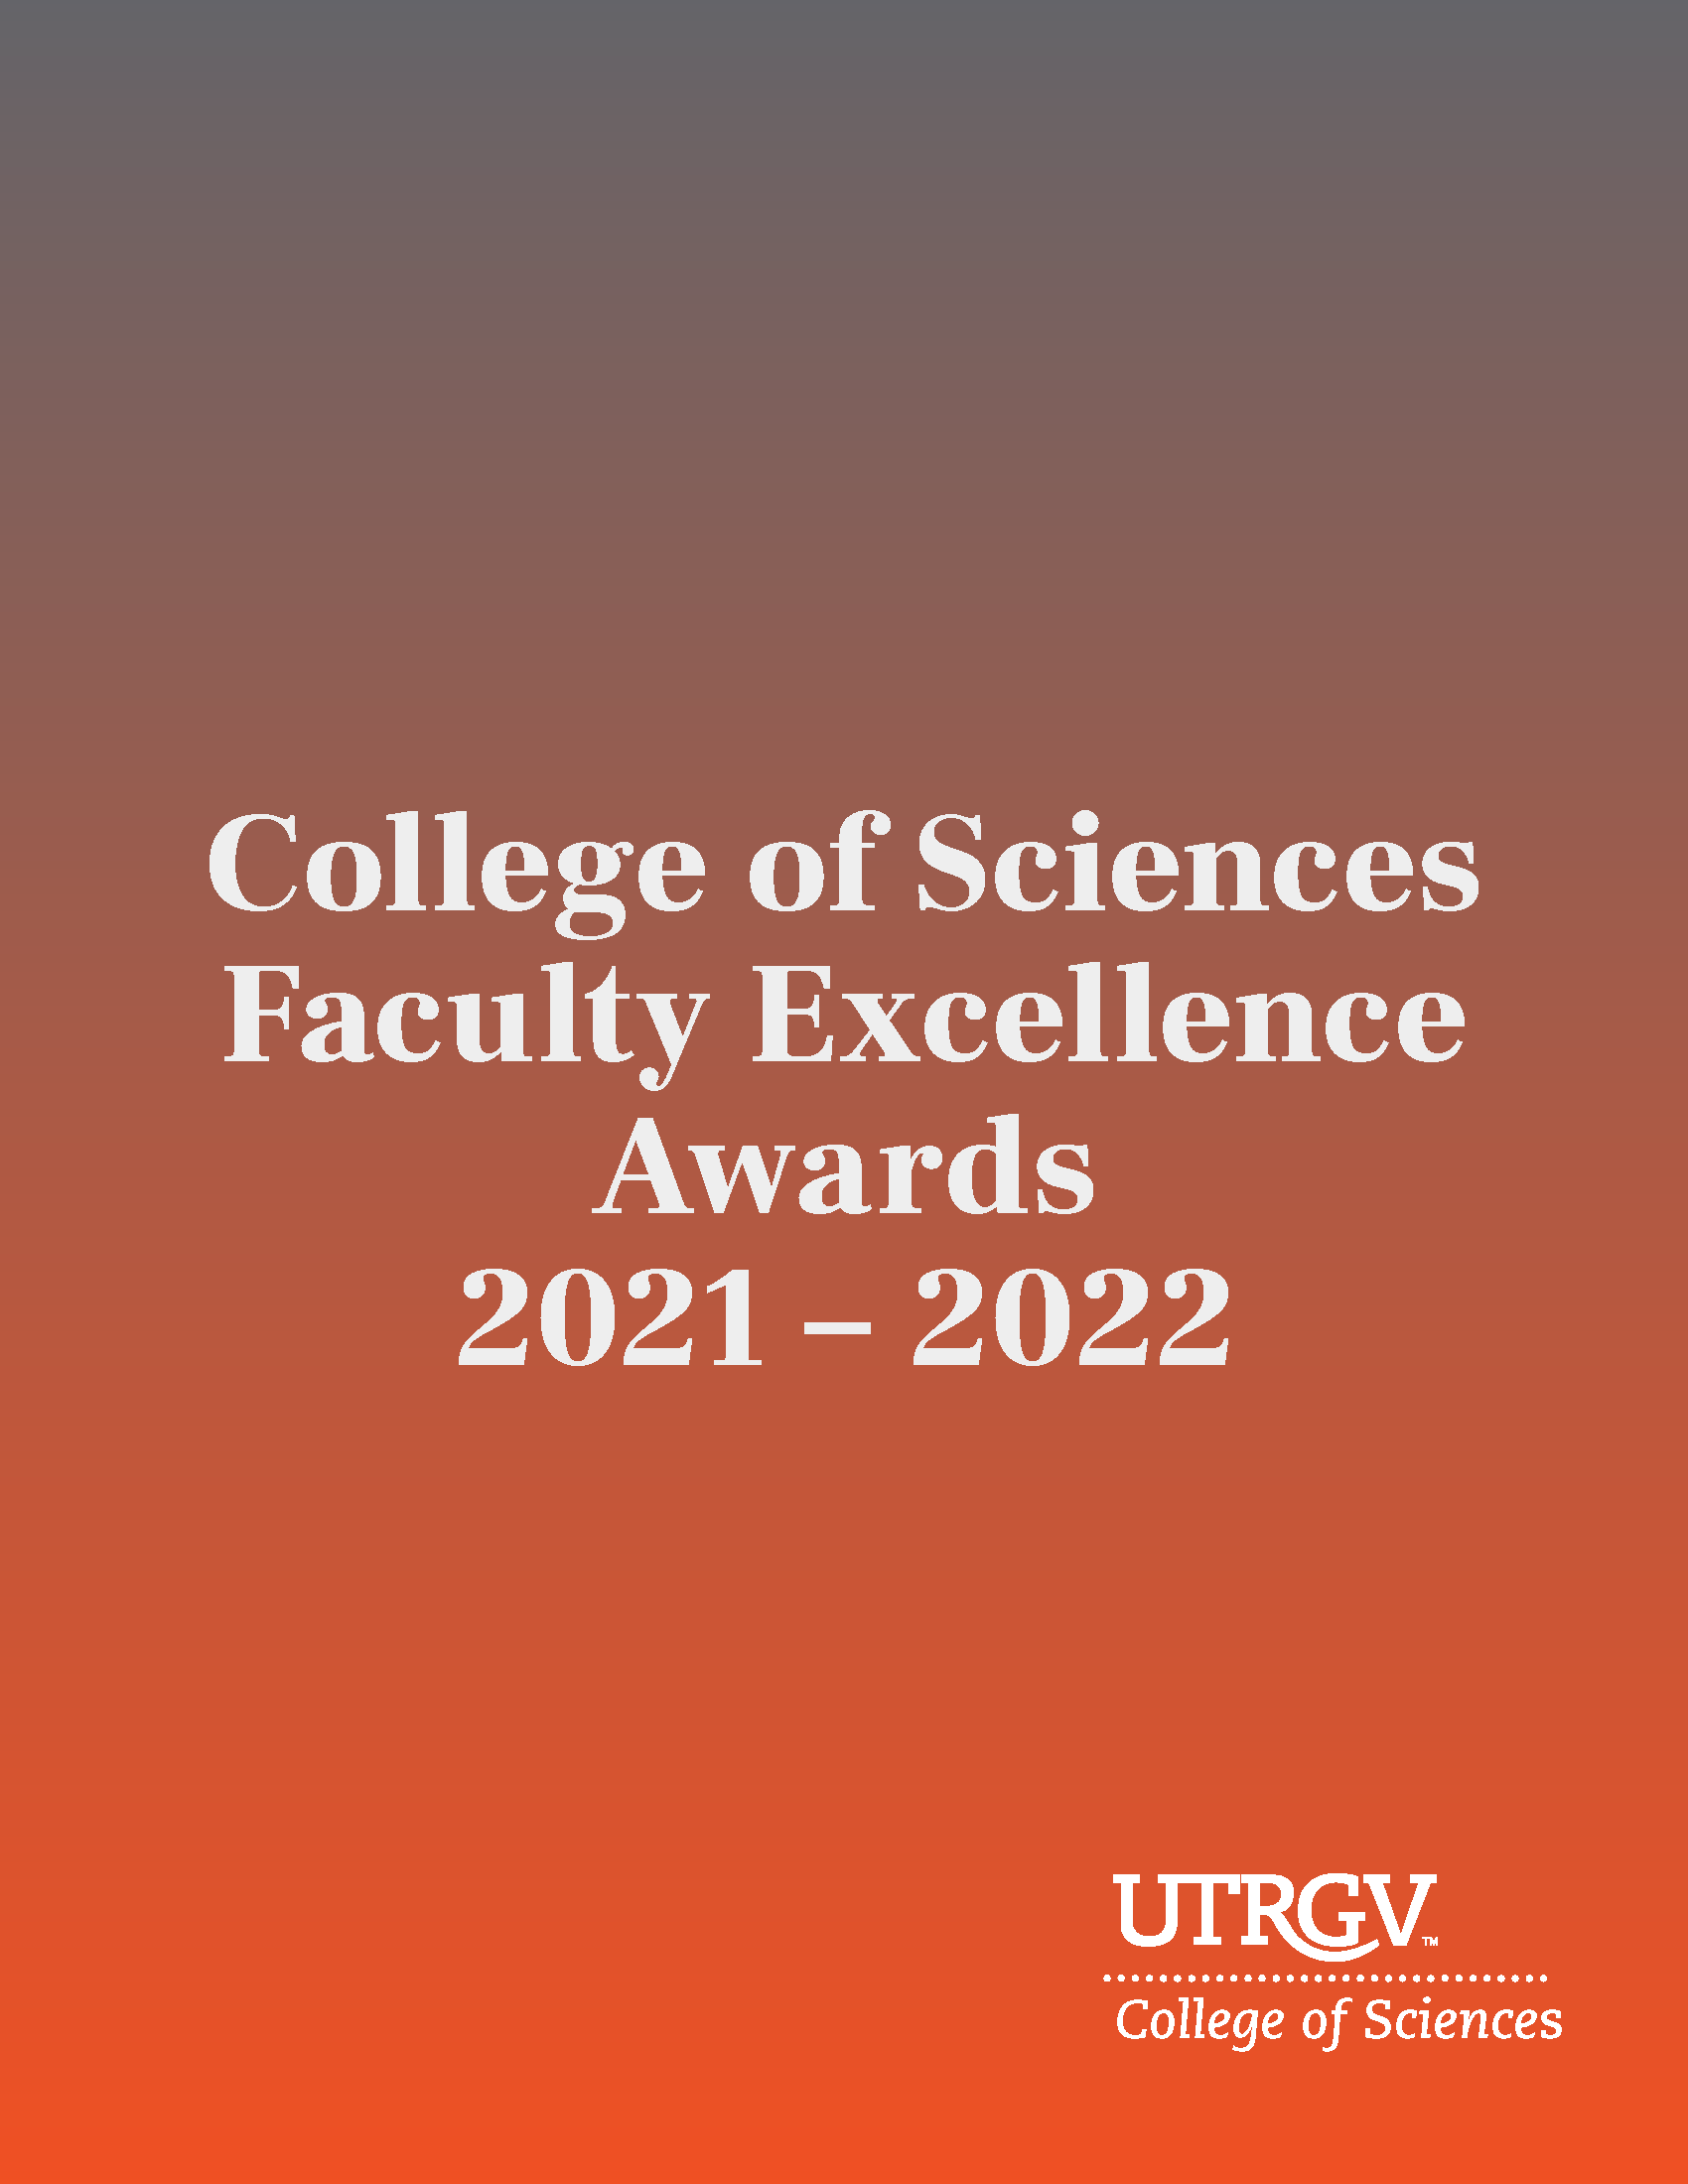 COS 2021 to 2022 Faculty Excellence Awards Booklet